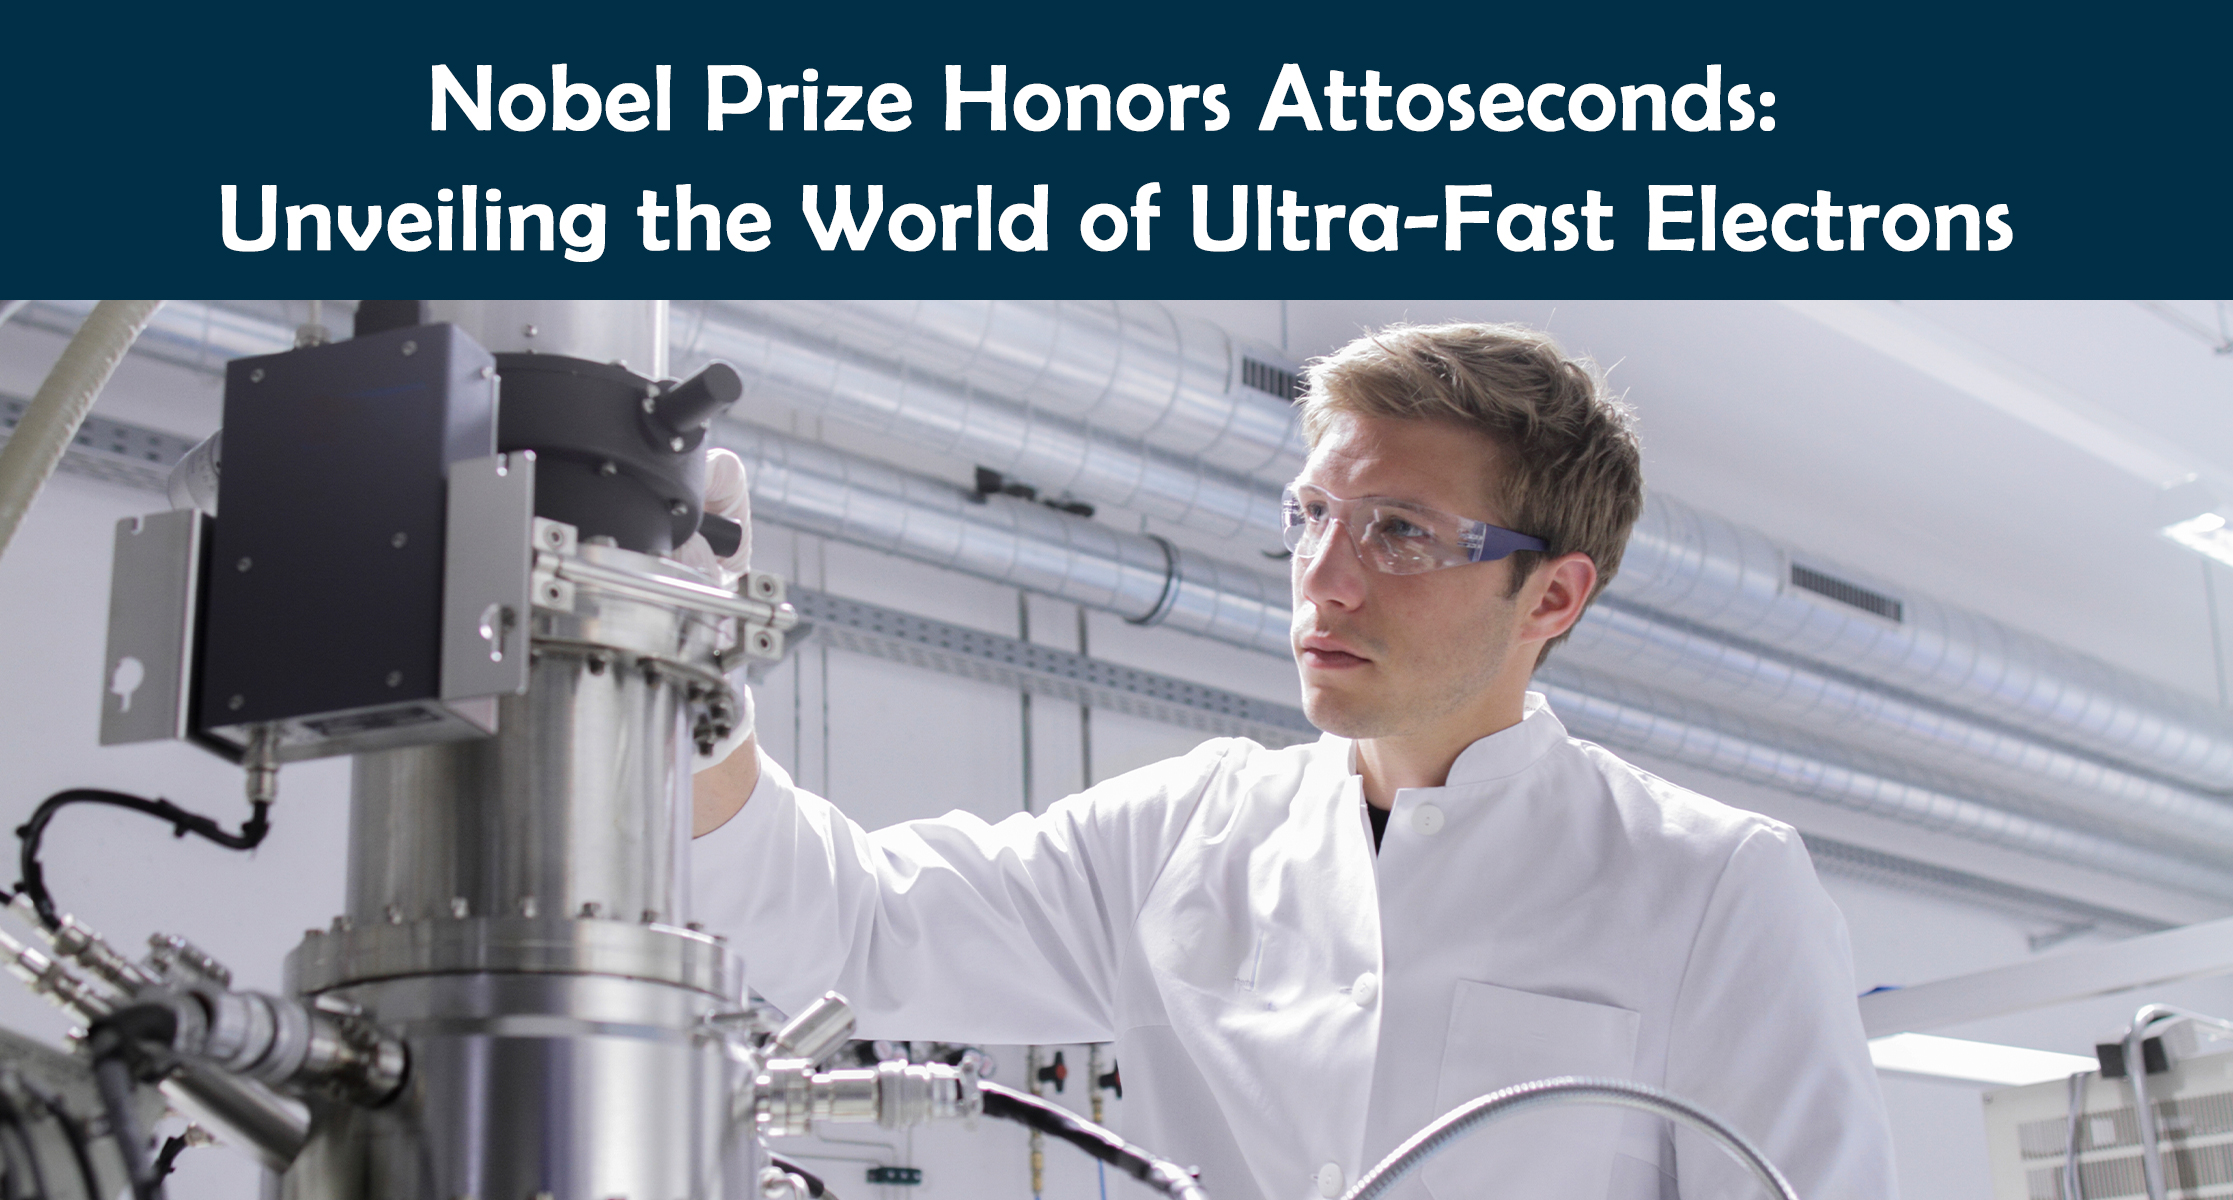 Nobel Prize Honors Attoseconds: Unveiling the World of Ultra-Fast Electrons